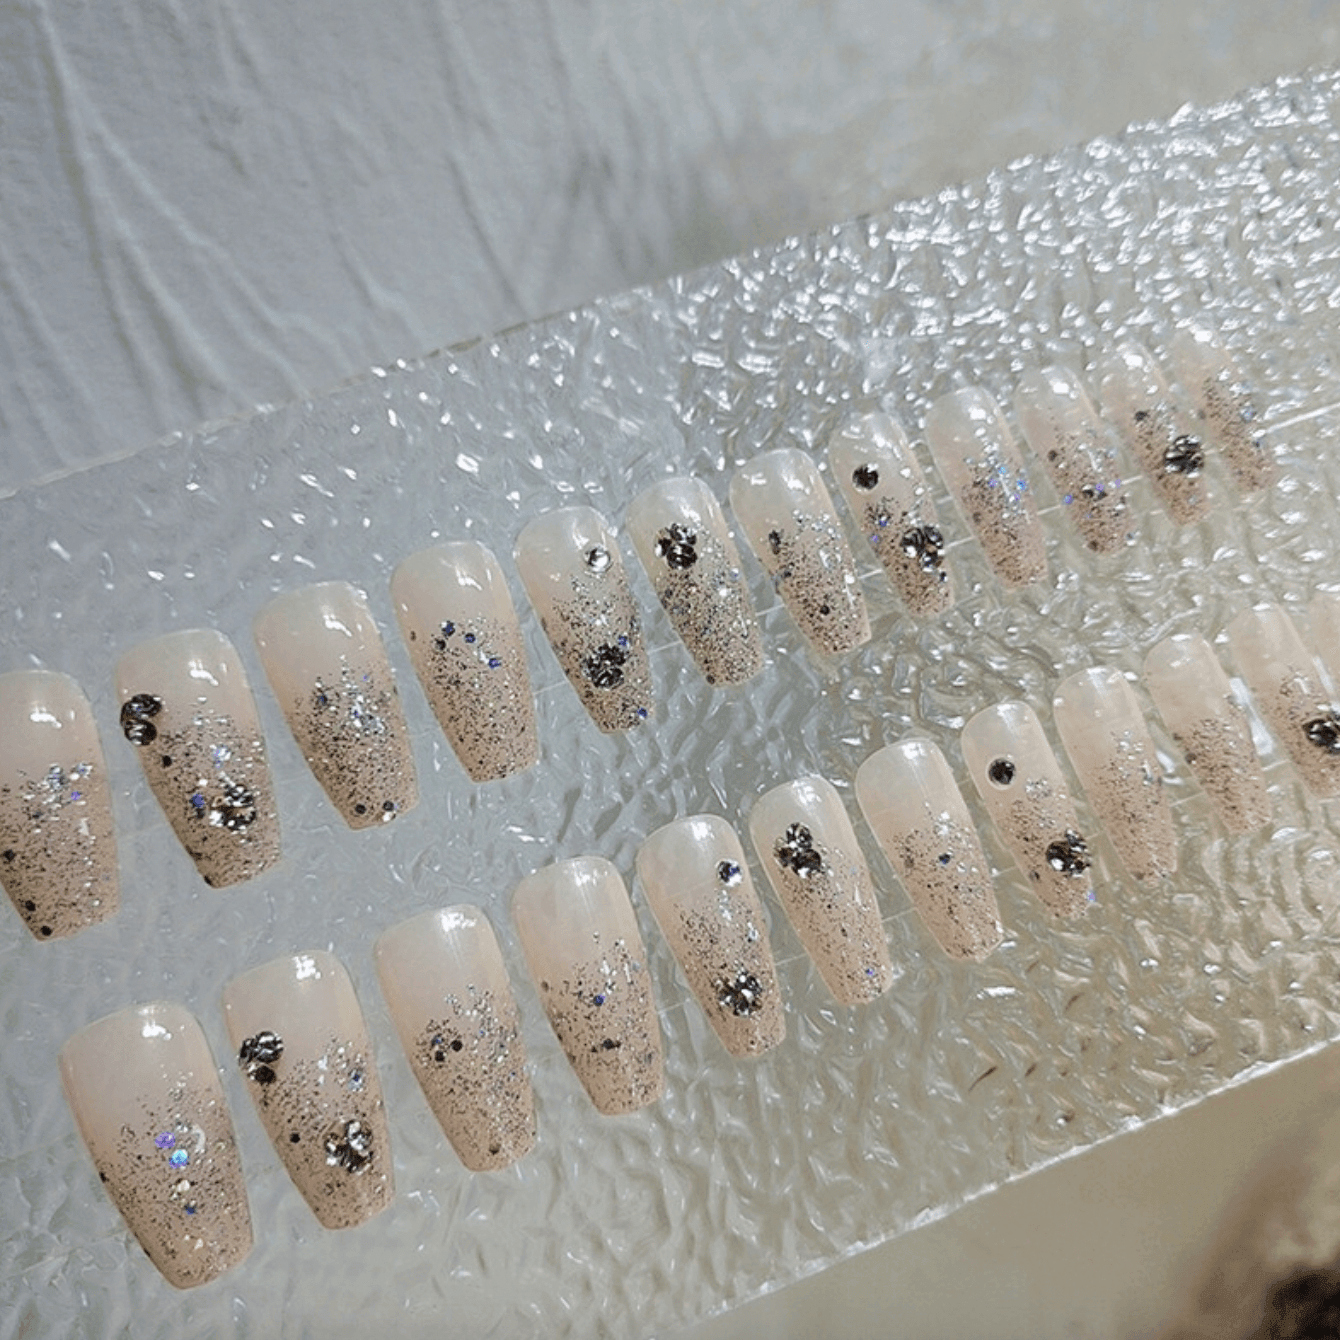 Shining Glitter with Diamonds Medium Length Coffin Press On Nails - Belle Rose Nails